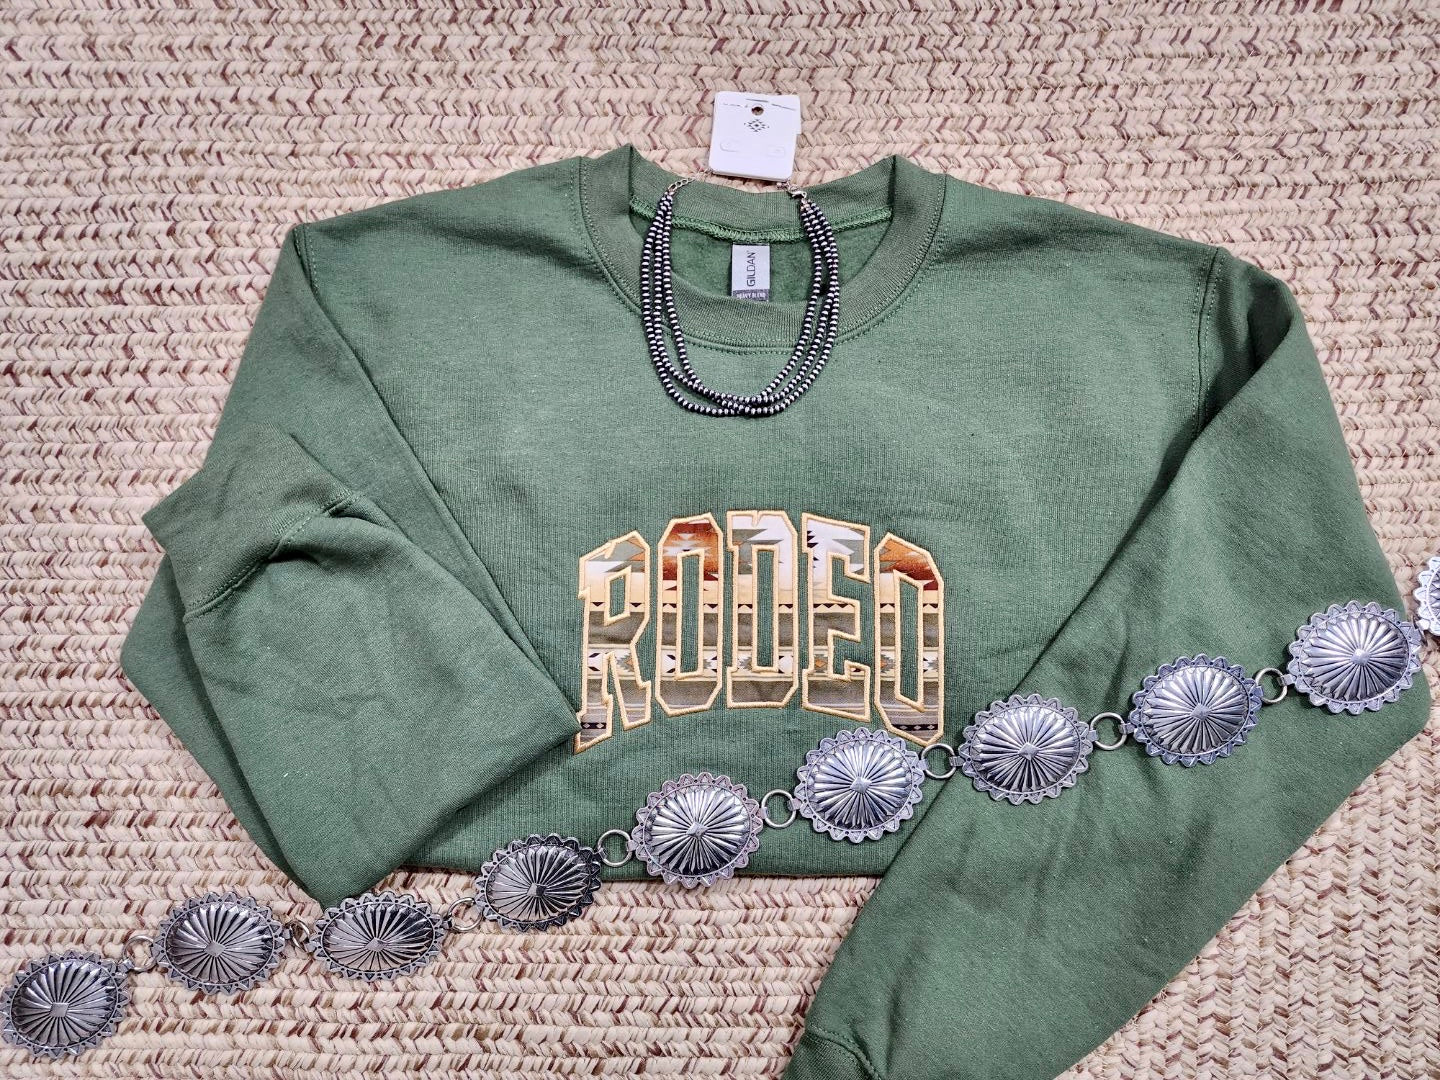 Rodeo embroidered olive sweatshirt